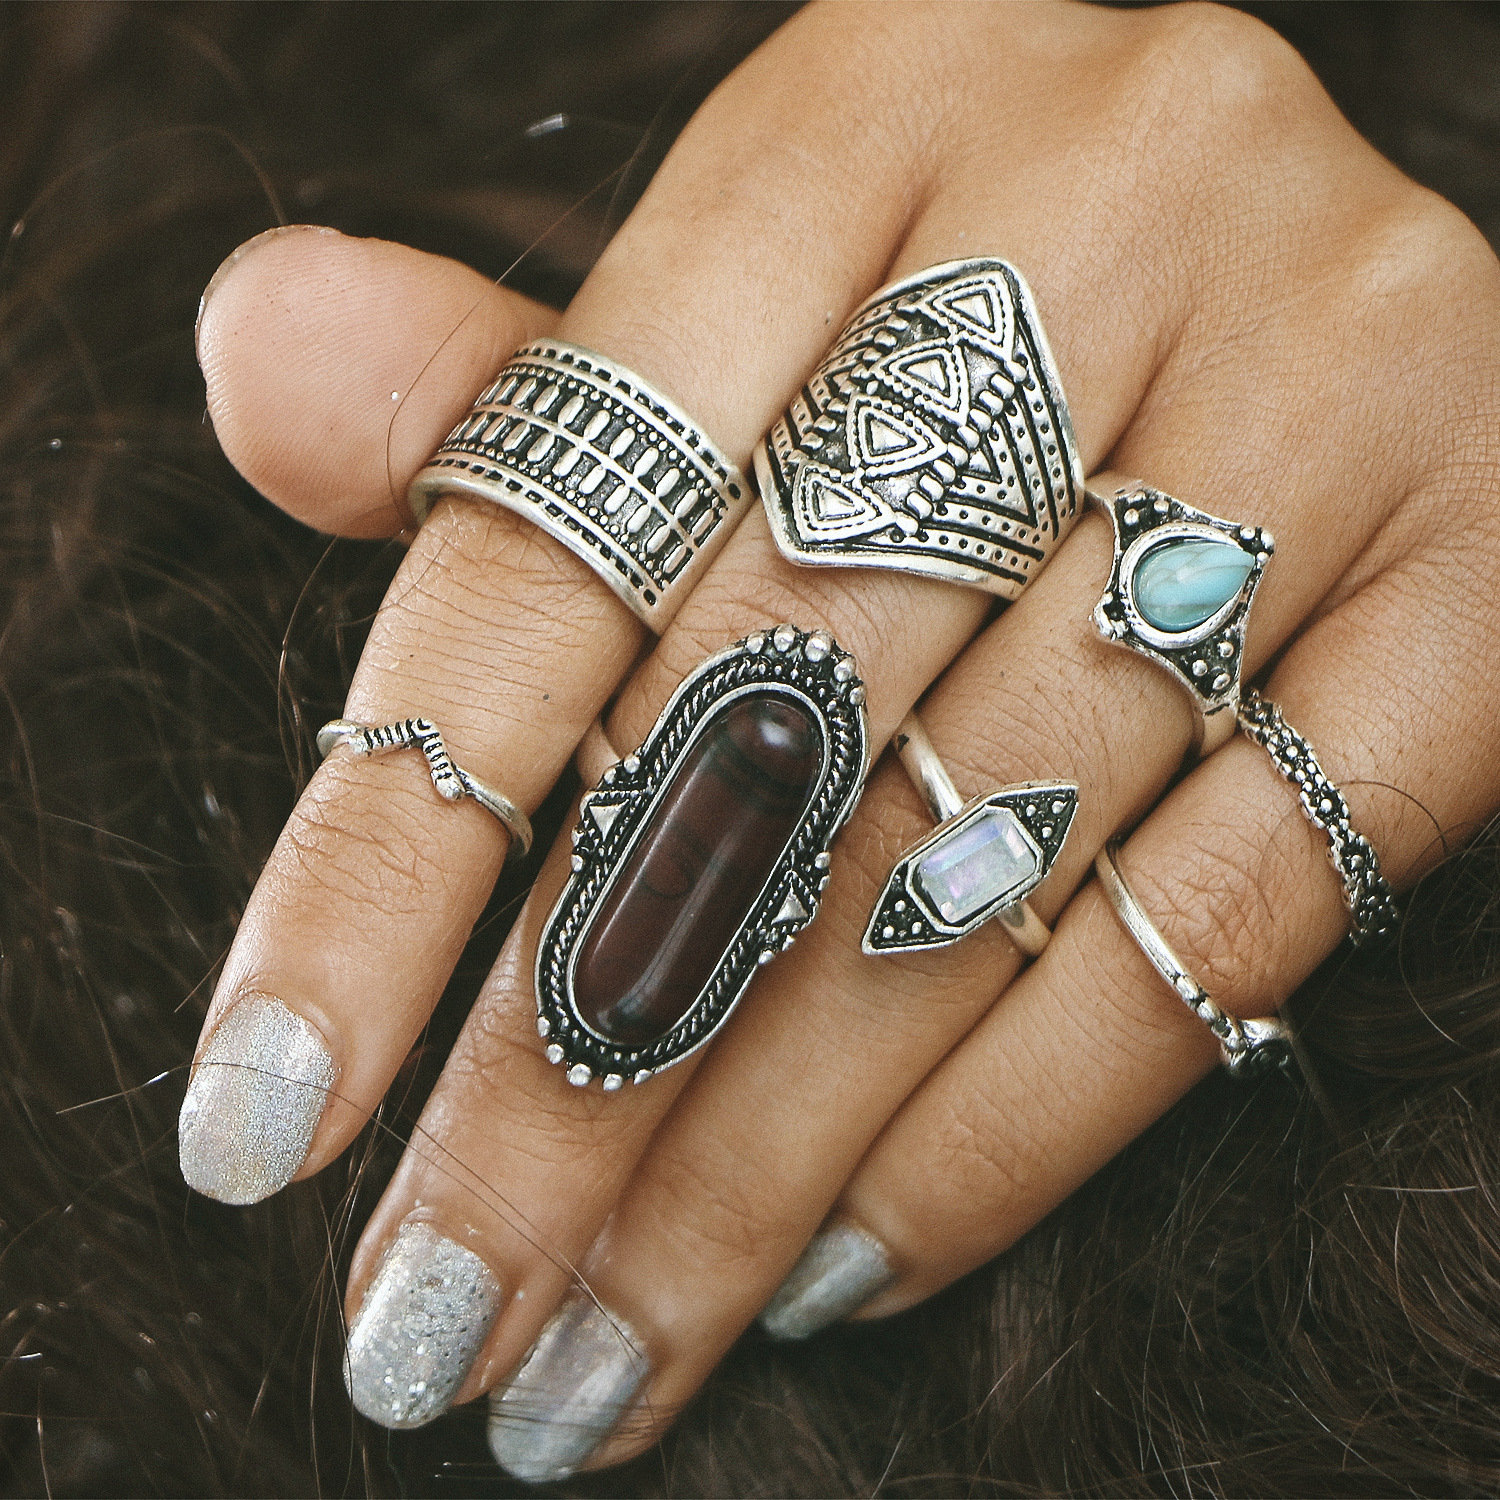 8 Pcs Bohemian Ring Set Vintage Turquoise Gem Silver Gold Casual Knuckle Rings Gift For Women